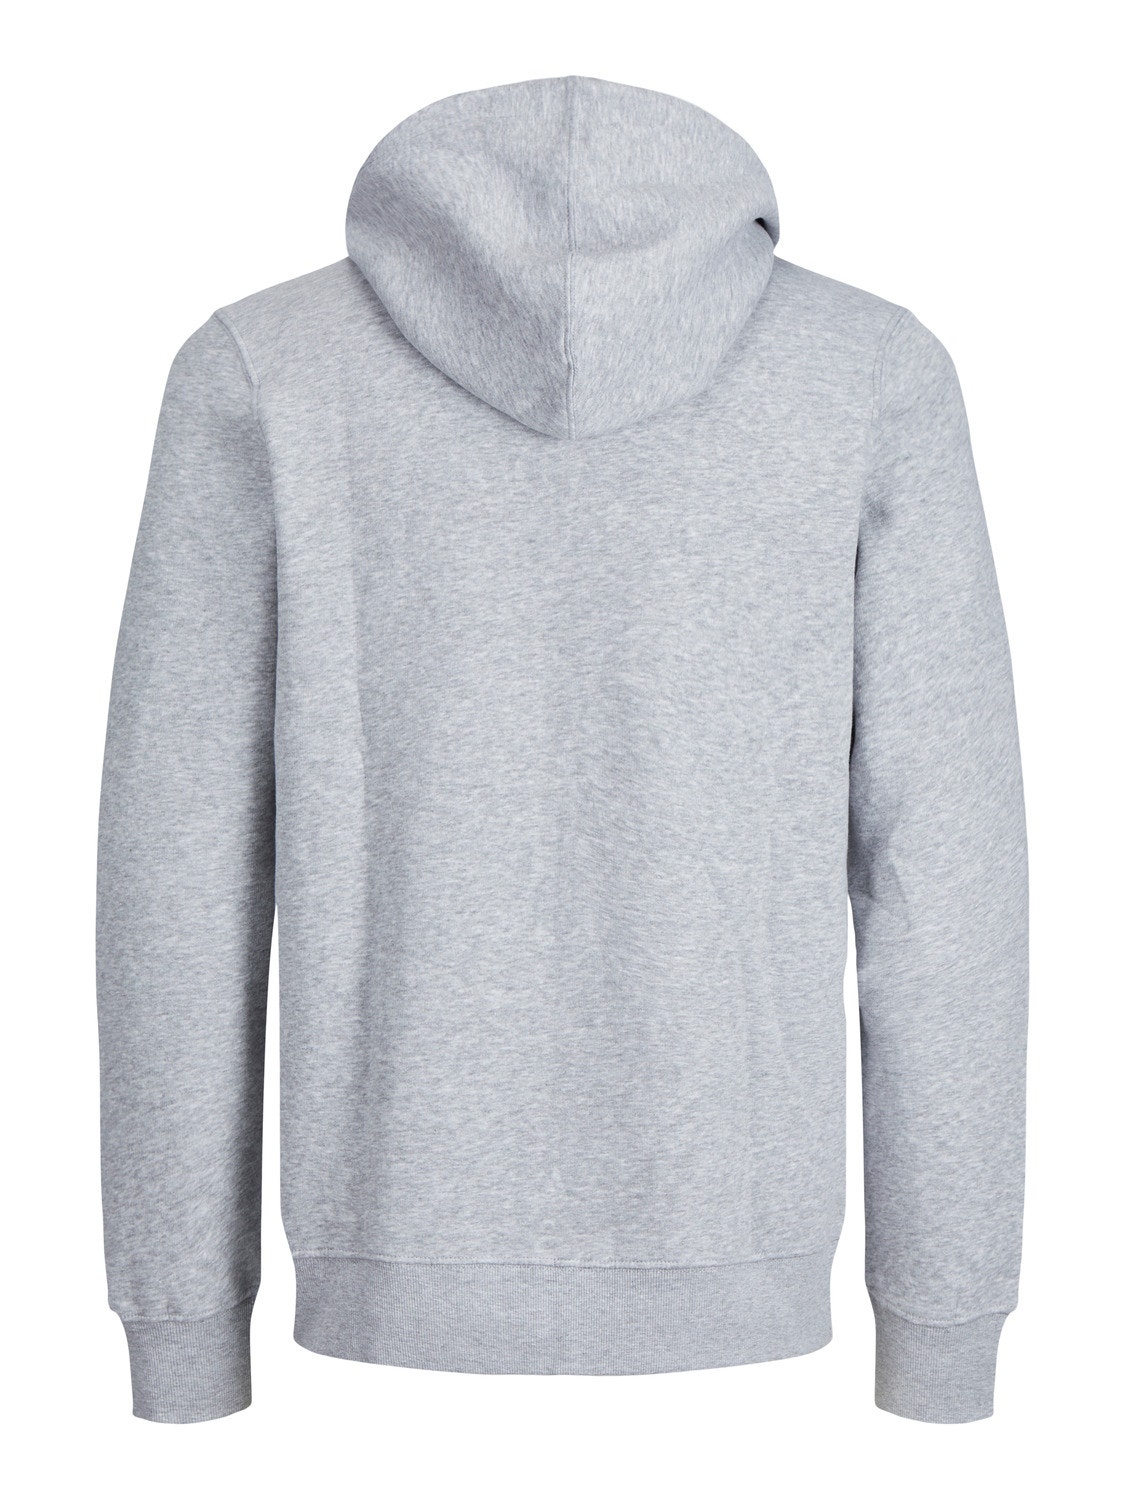 Pale Cool Gray - Grey Solid Color Pairs PPG Icy Bay PPG1012-1 - All One  Single Shade Hue Colour Kids Pullover Hoodie by Simply_Solid_Colors_  Now_Over_4000_Essen